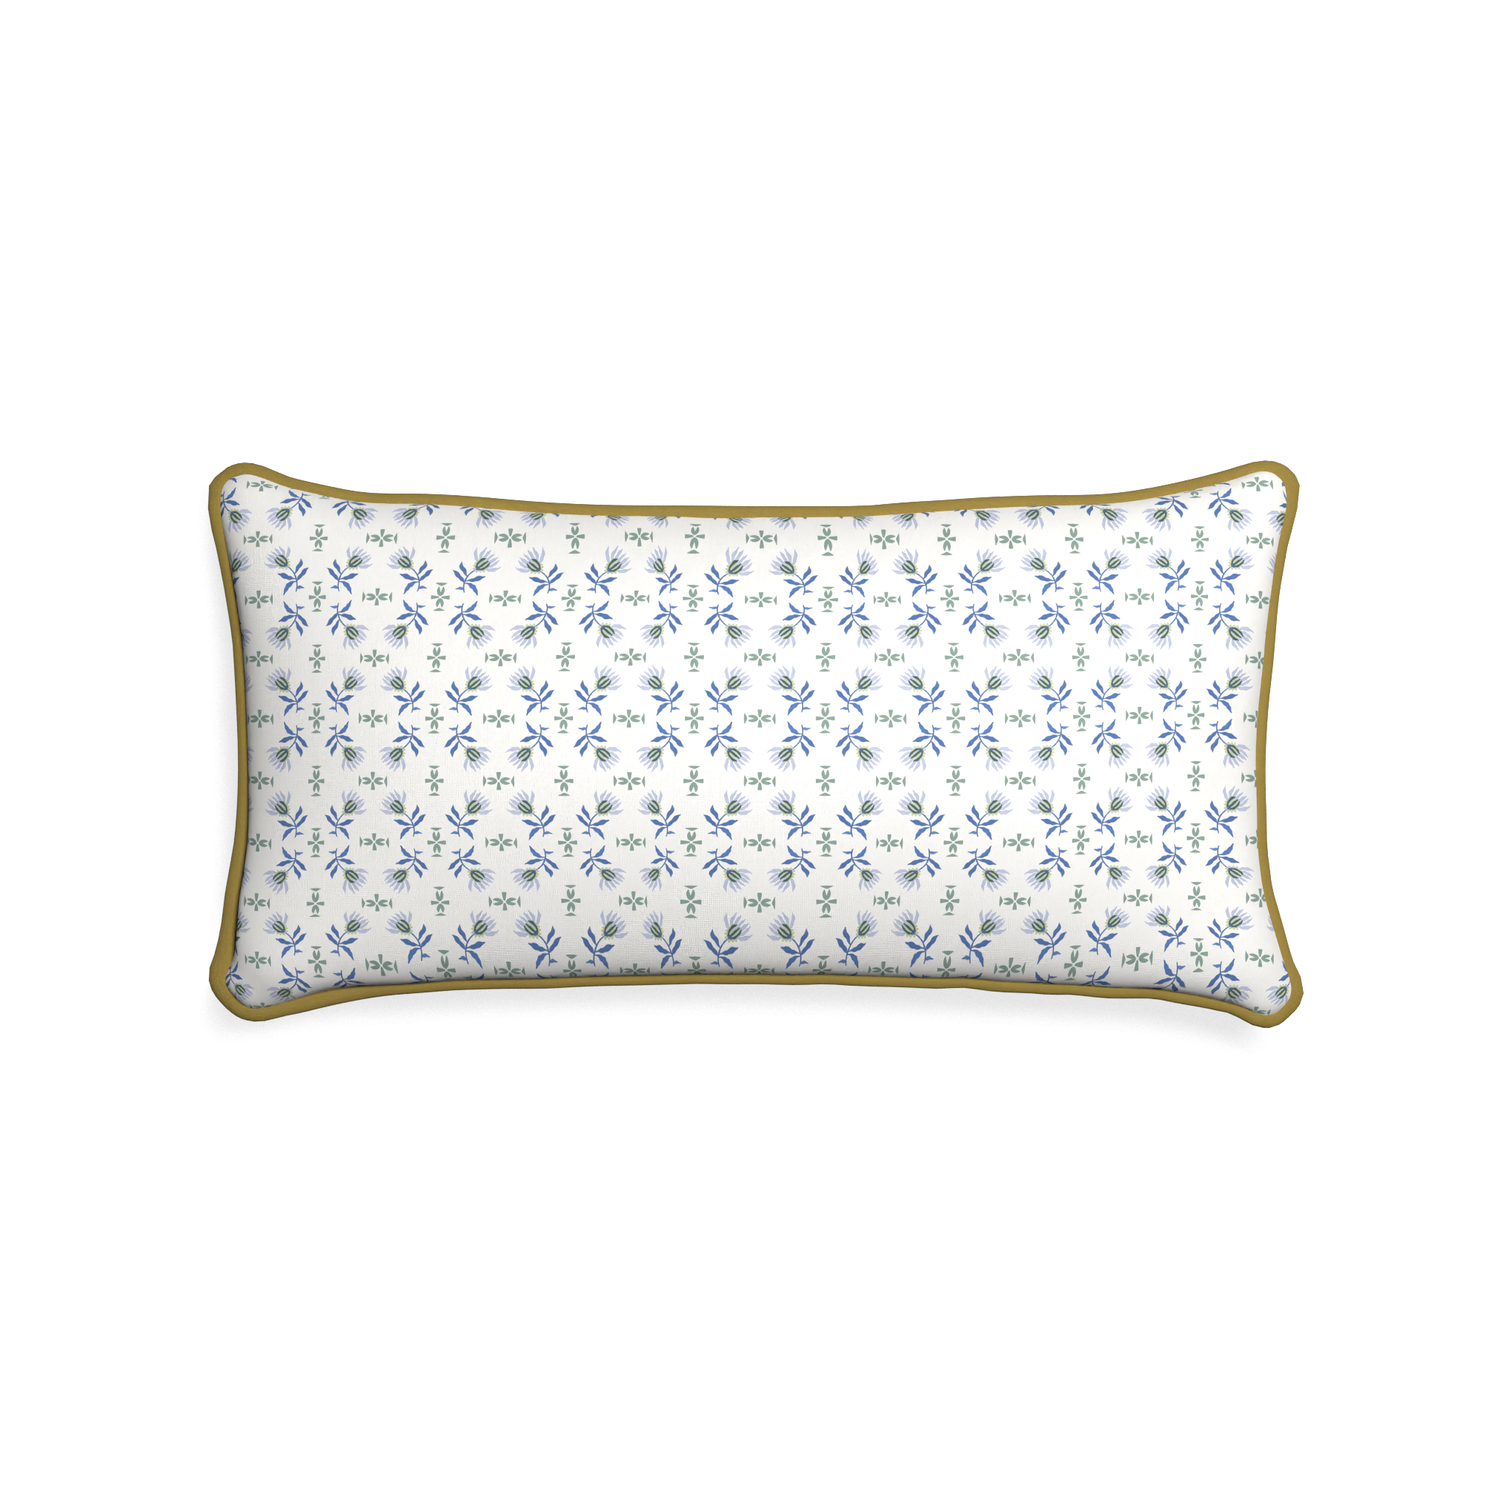 Midi-lumbar lee custom blue & green floralpillow with c piping on white background